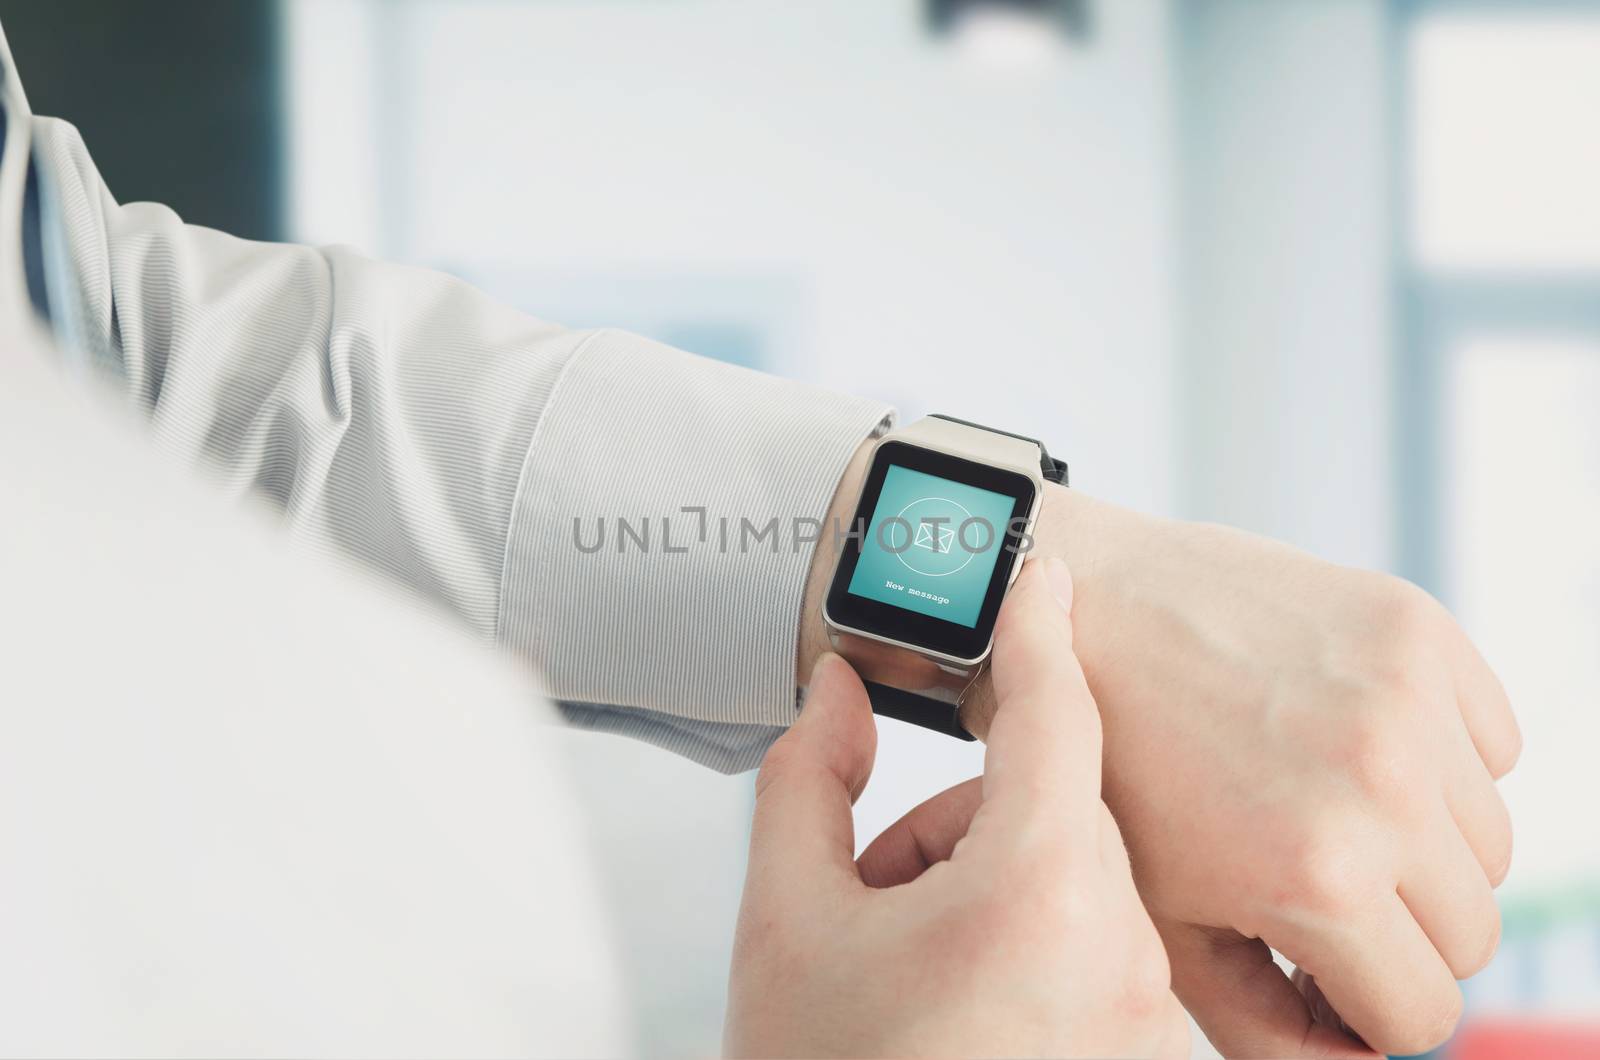 Man using smartwatch with e-mail notifier by simpson33